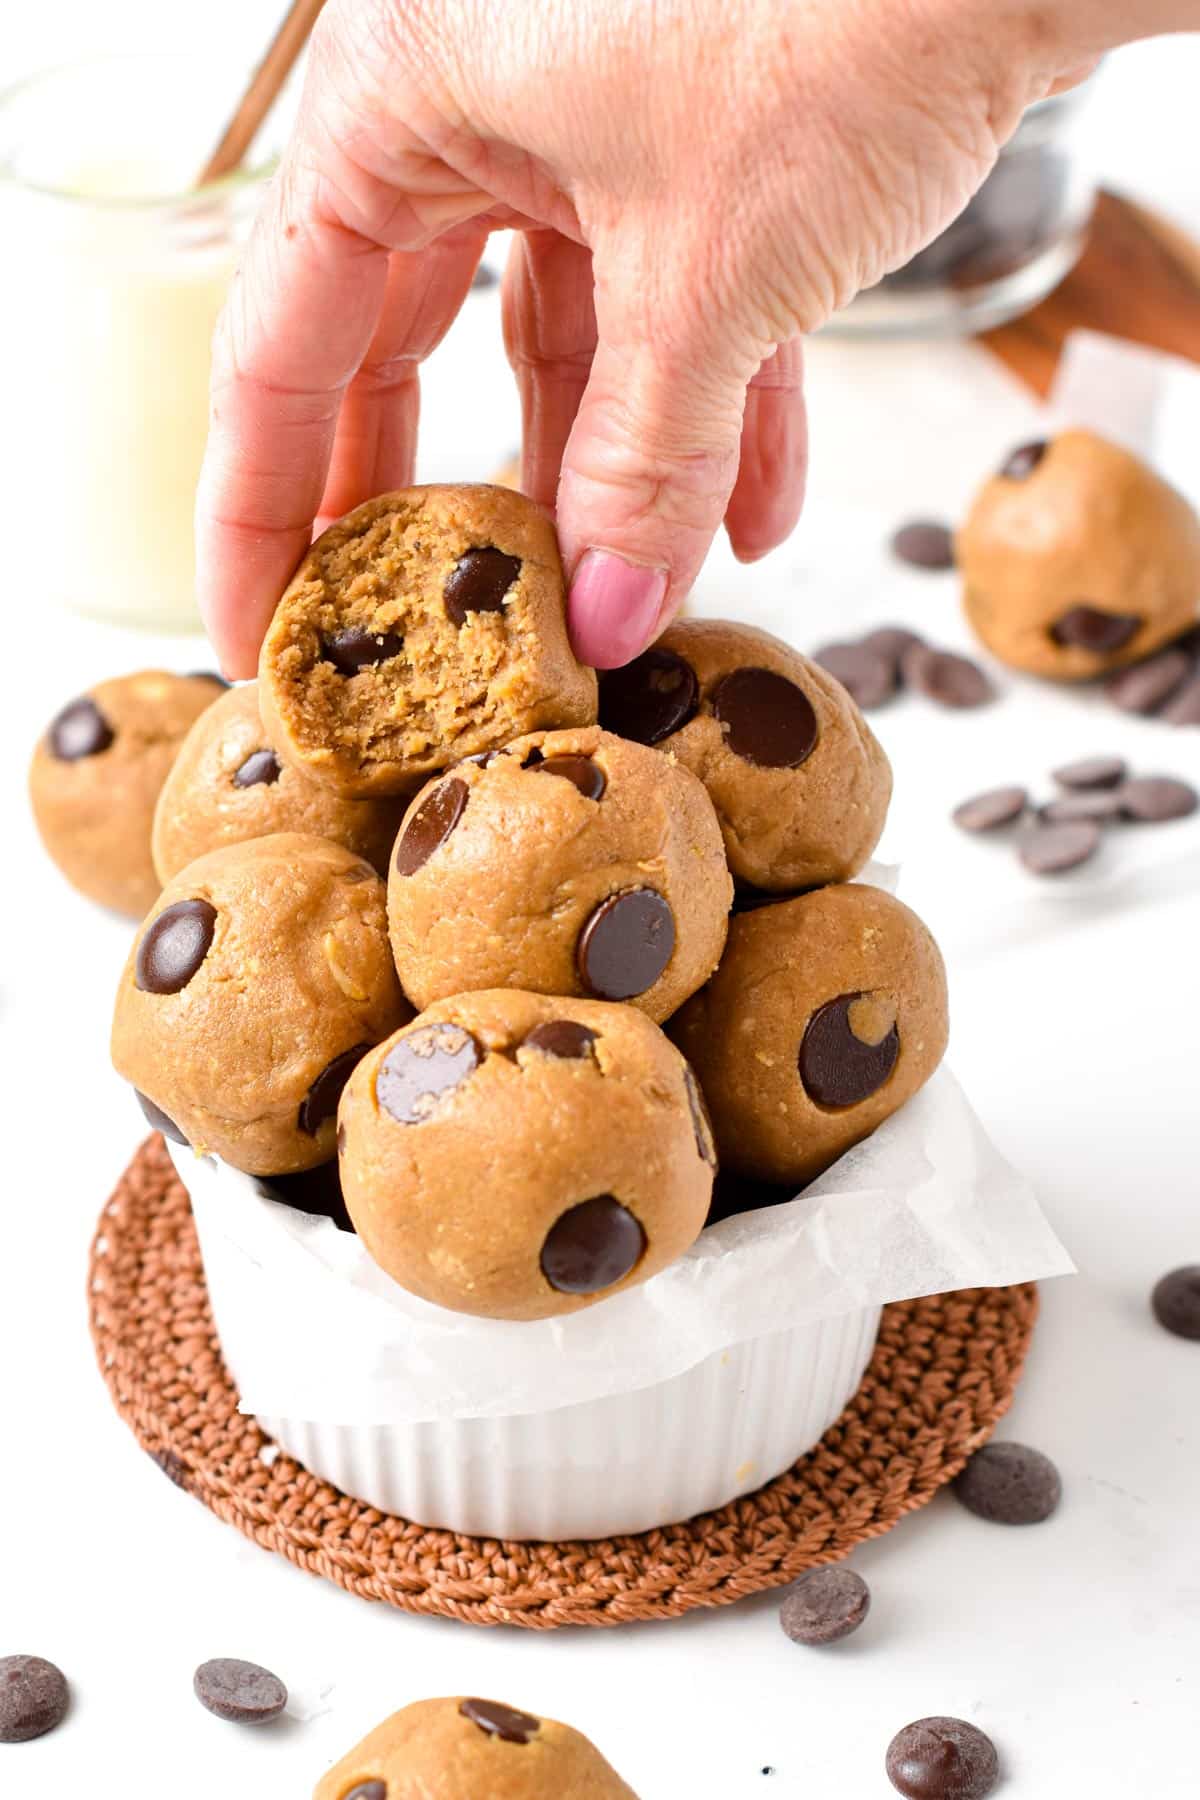 These Cookie Dough Protein Balls are easy no-bake healthy snacks packed with plant-based proteins from nut butter and protein powder. Plus, these are vegan, gluten-free, and dairy-free.